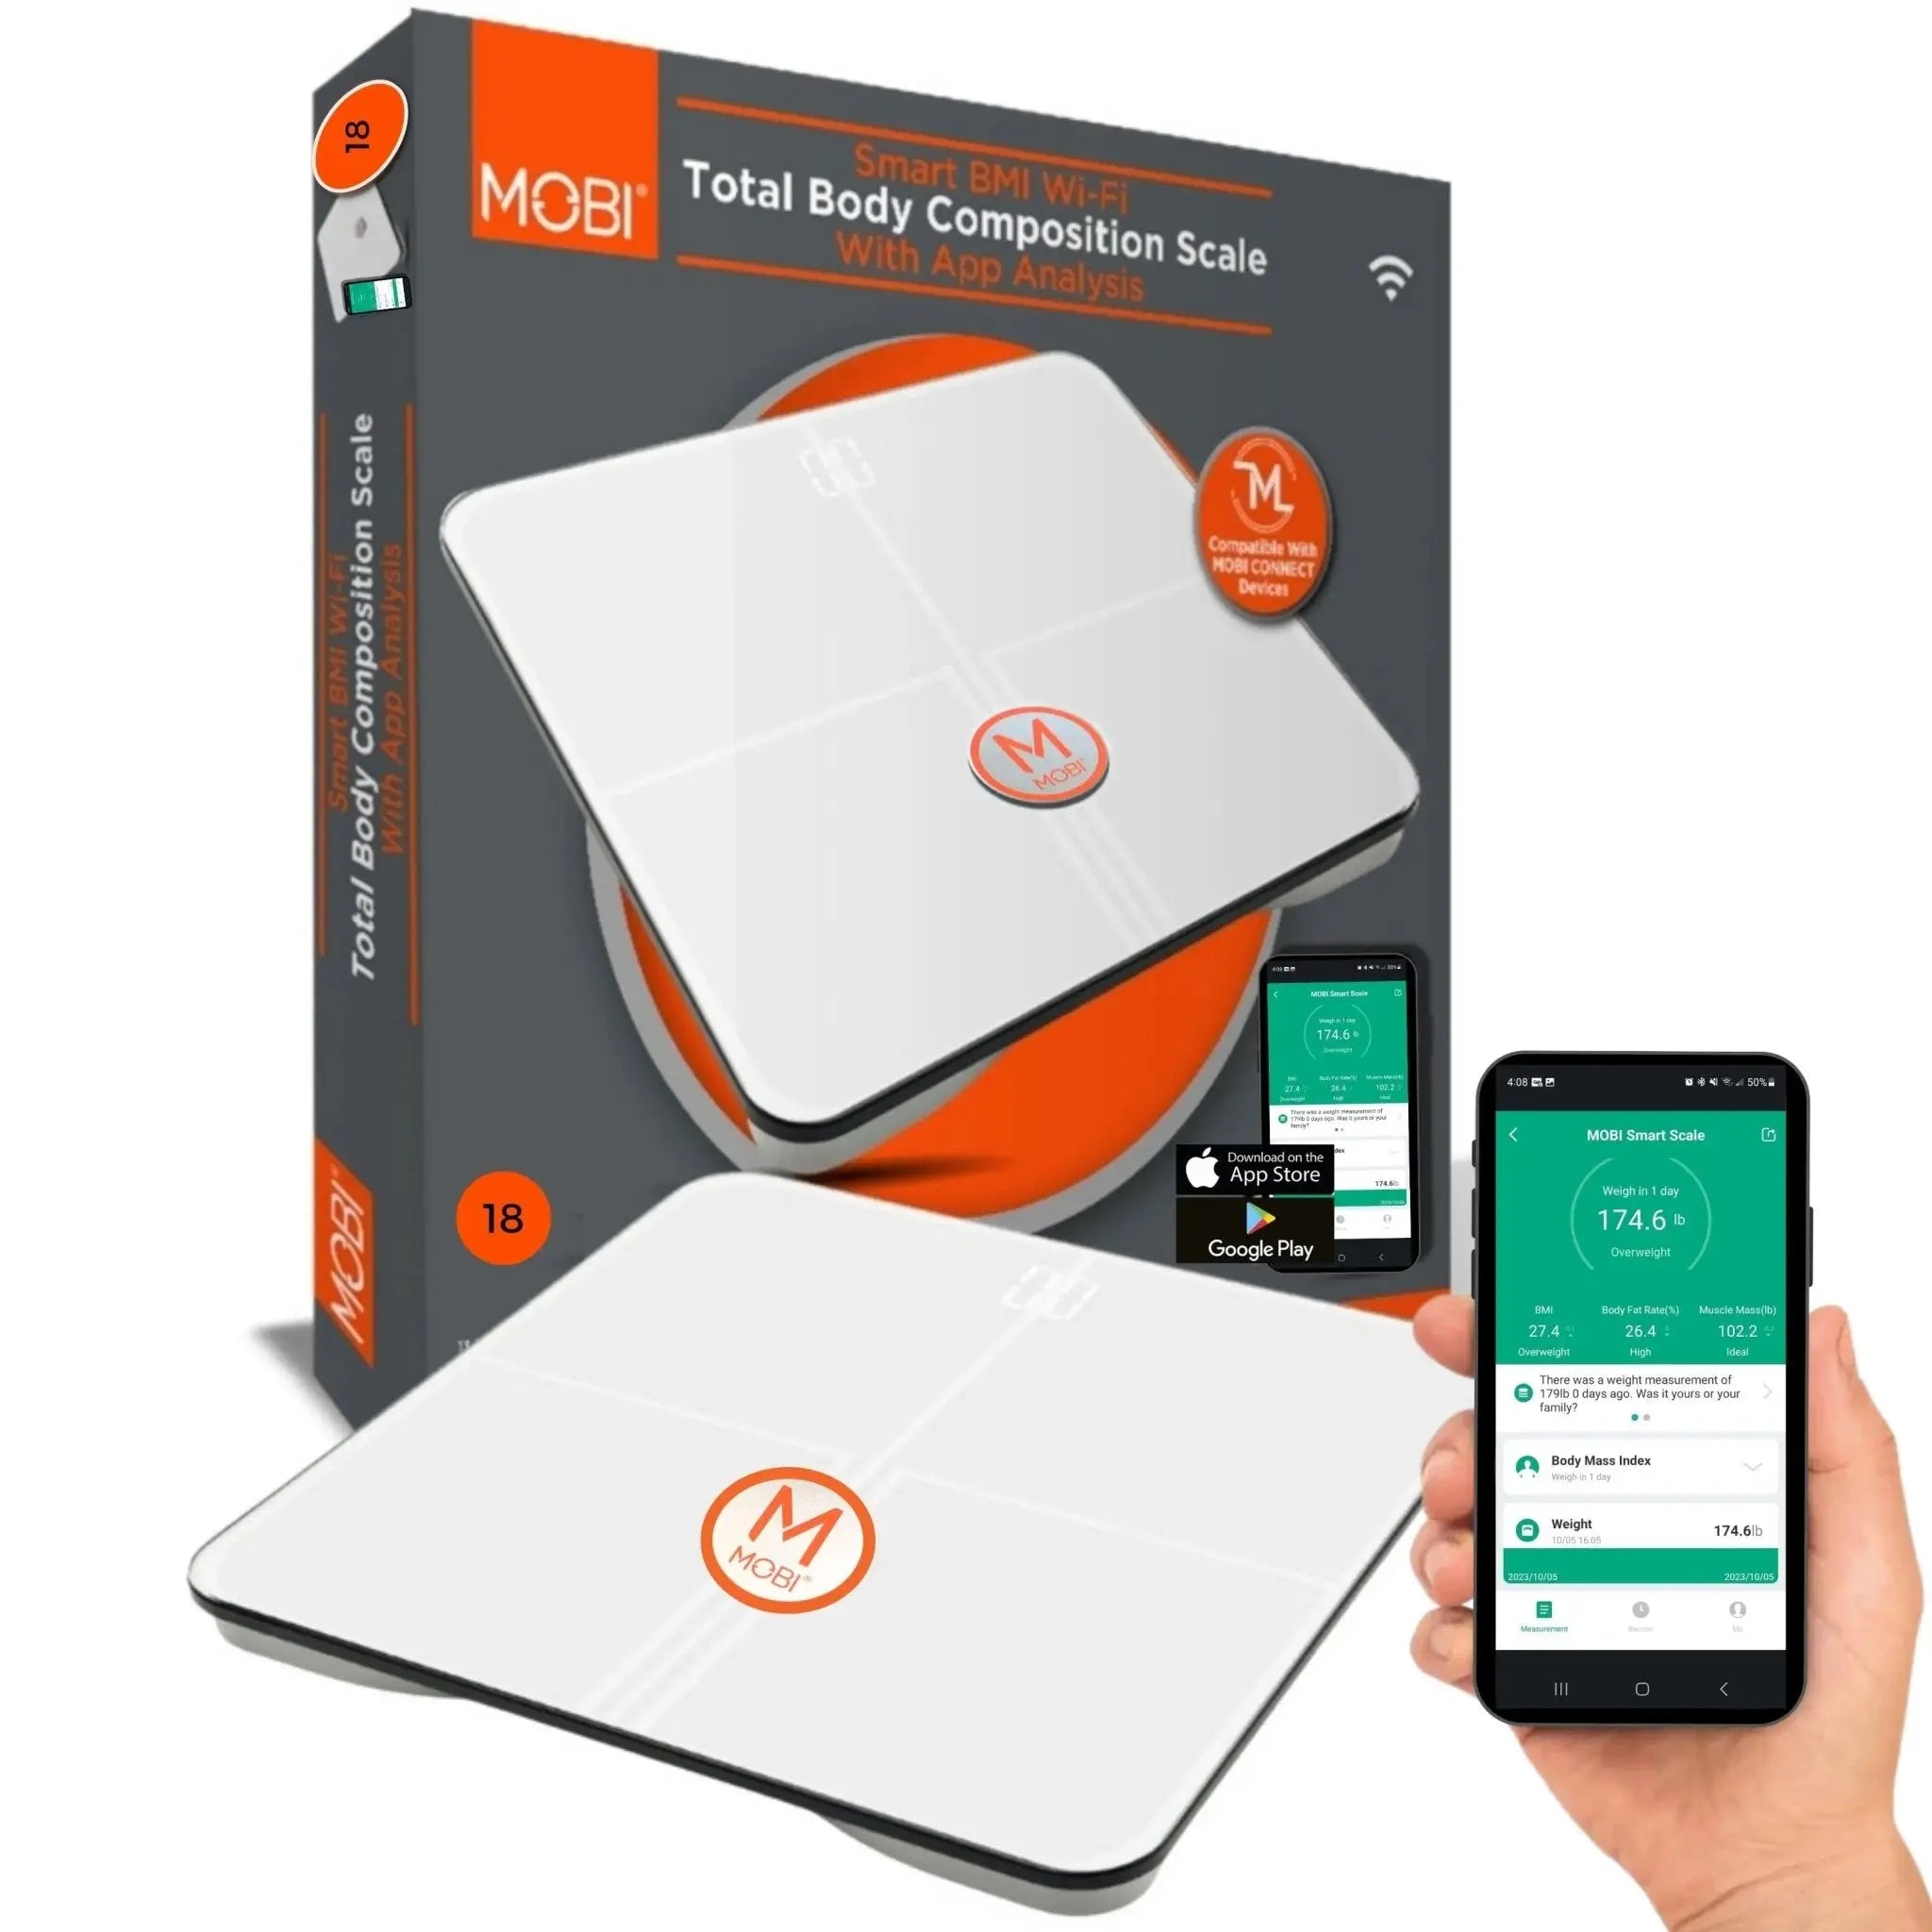 Smart BMI Wi-Fi Total Body Composition Scale with 18 Body Measurements